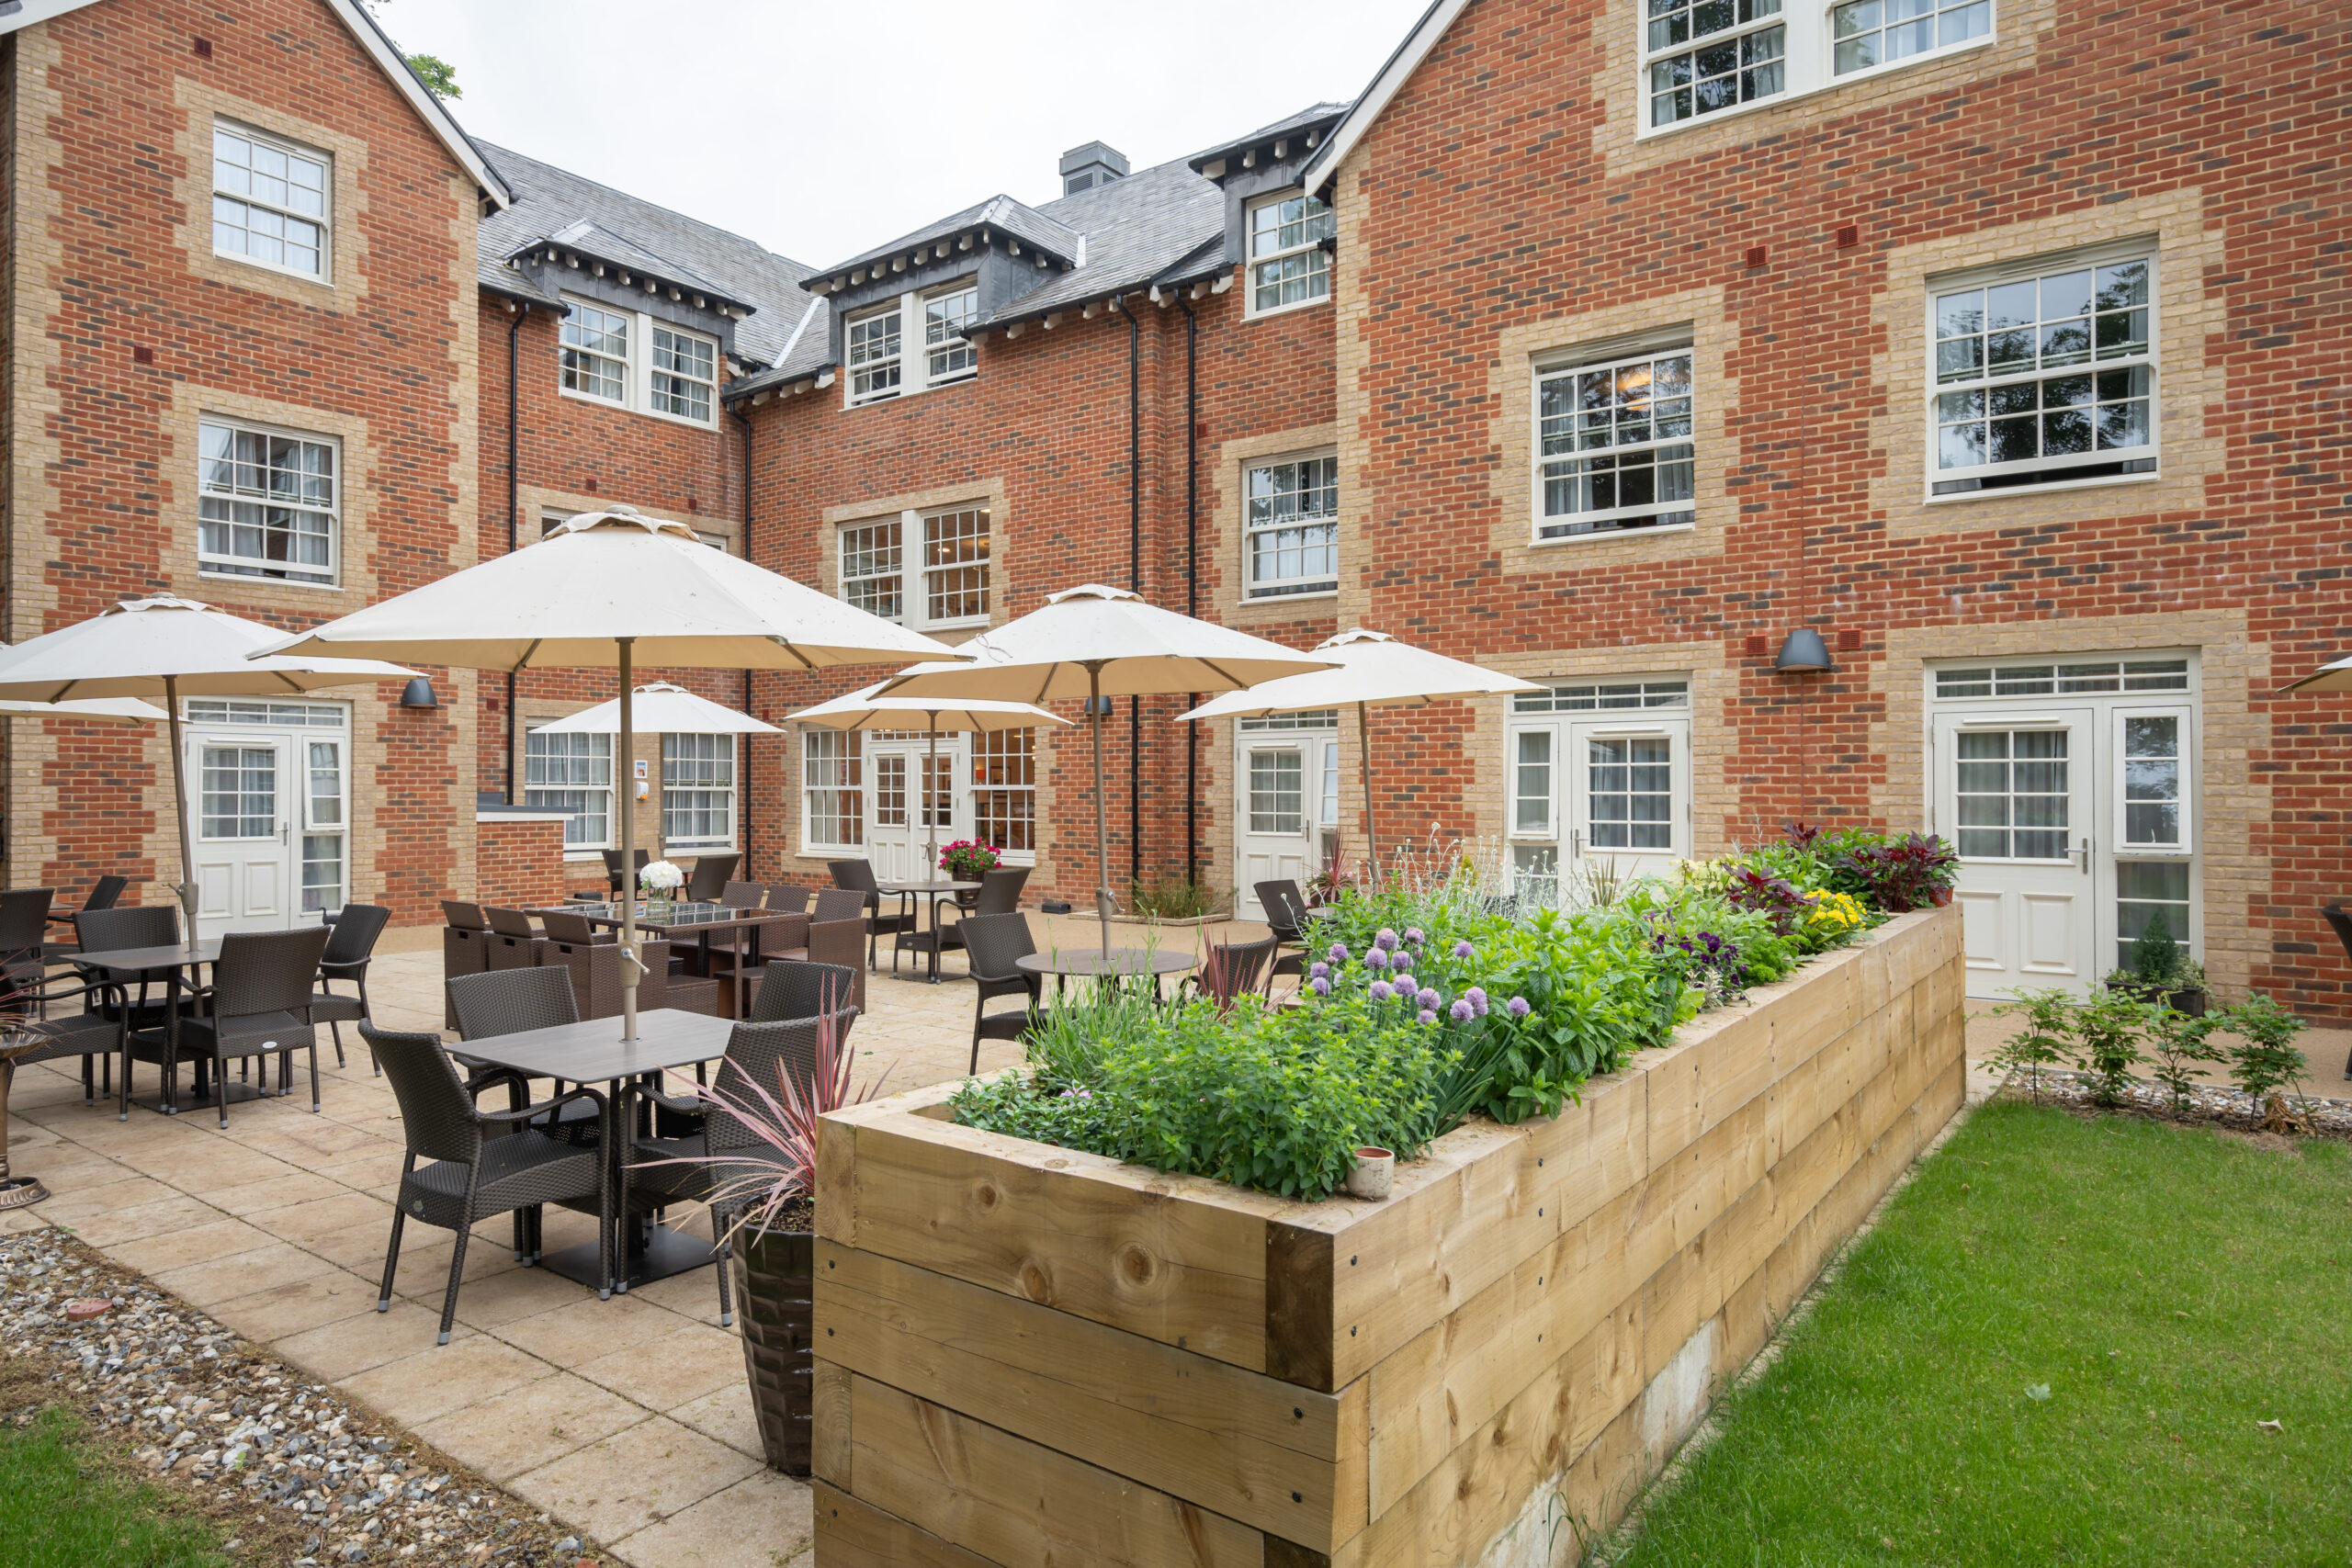 Outdoor seated patio area at Elsyng House Care Home in Enfield